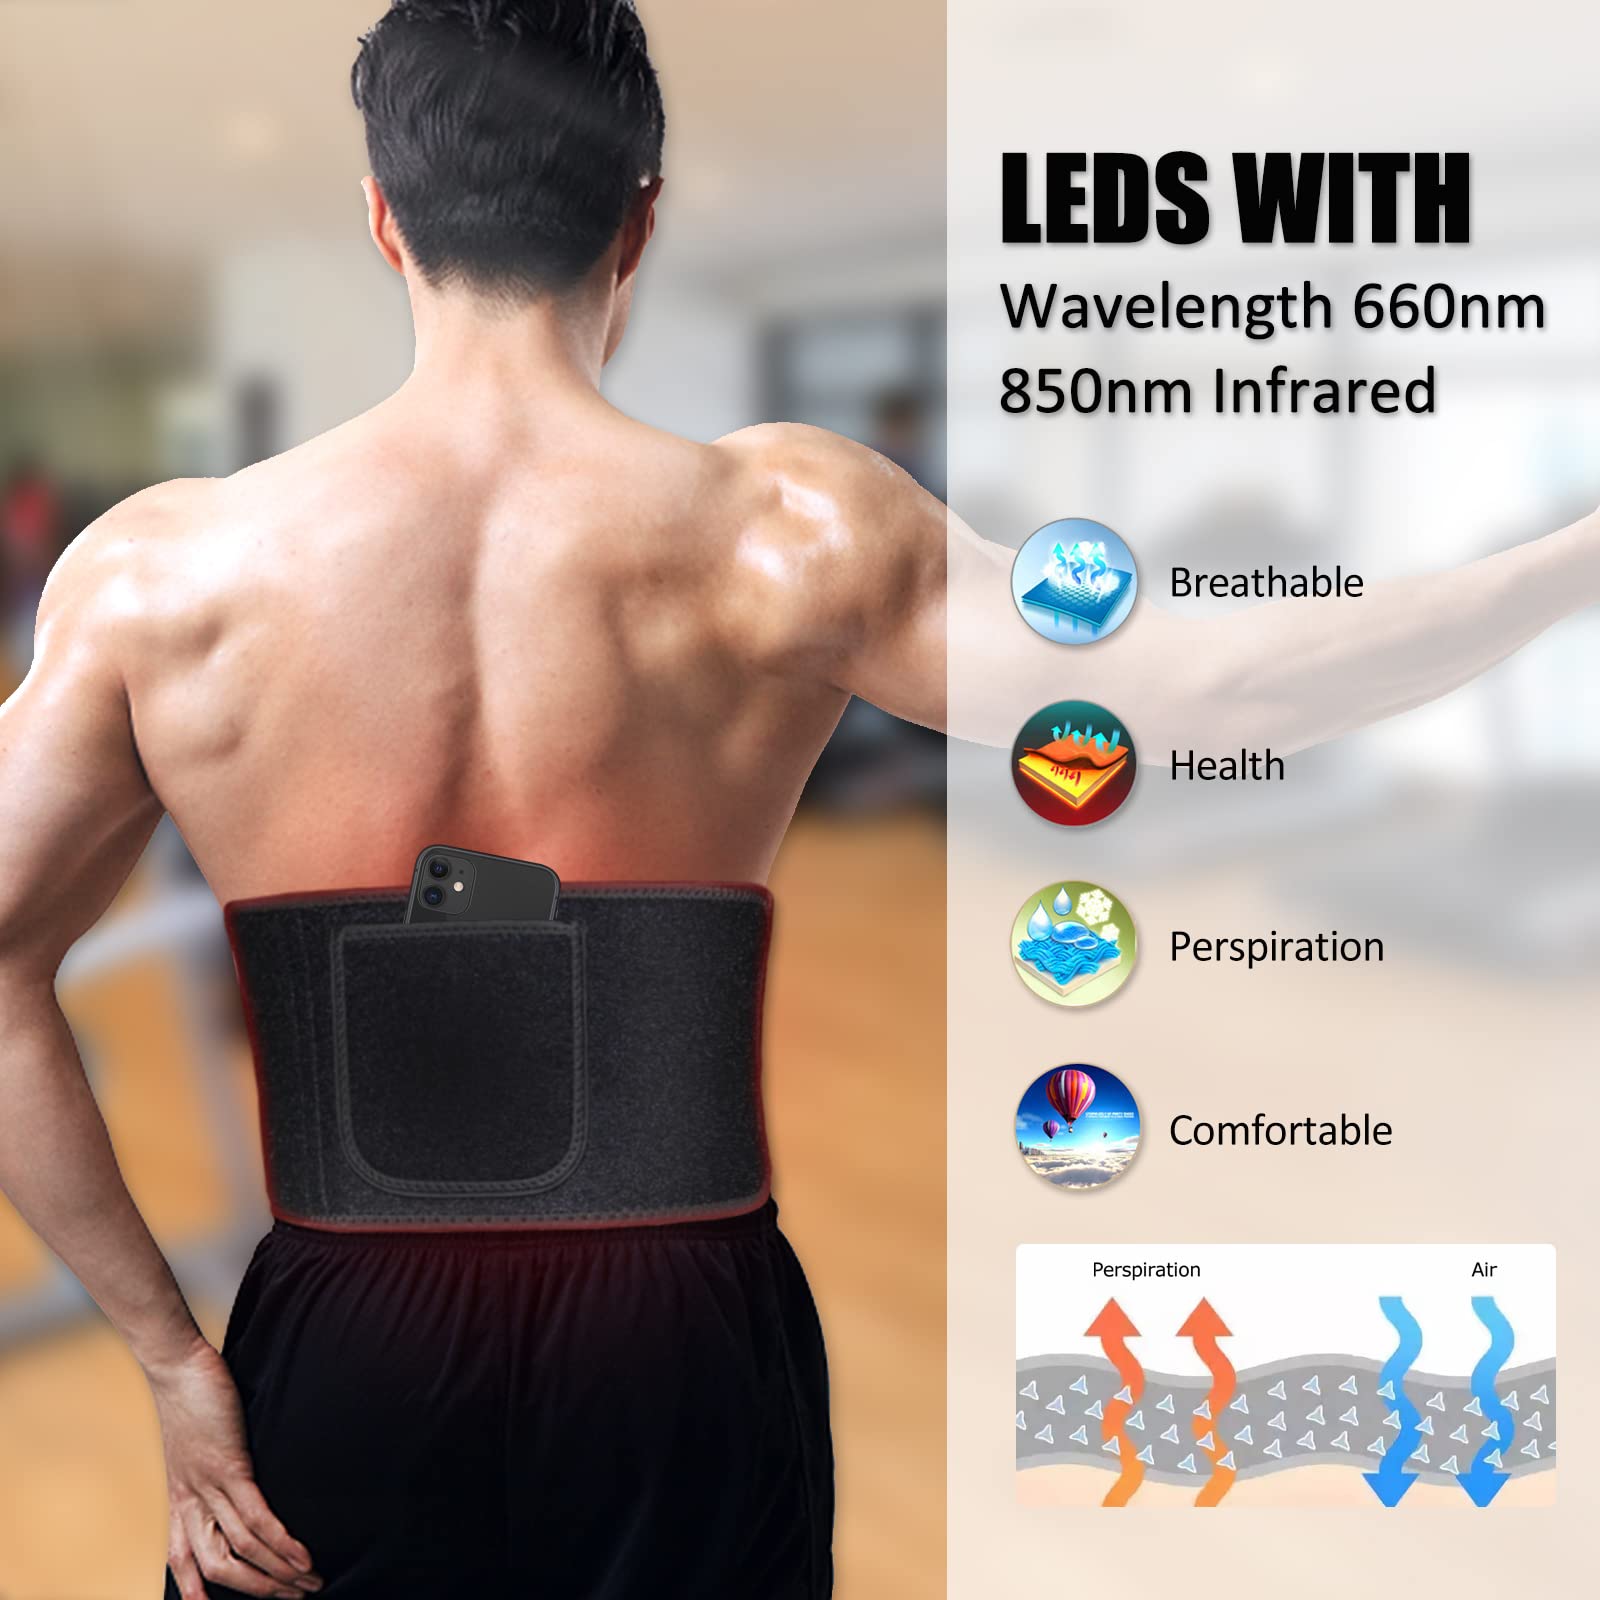 ADVASUN New LED Red Light Belt Devices for Body Flexible Wearable Deep Red 660nm and Near Infrared 850nm Pad with Timer for Back Shoulder Joints Muscle,Waist with 2 Wavelengths(Blue-105pcs)